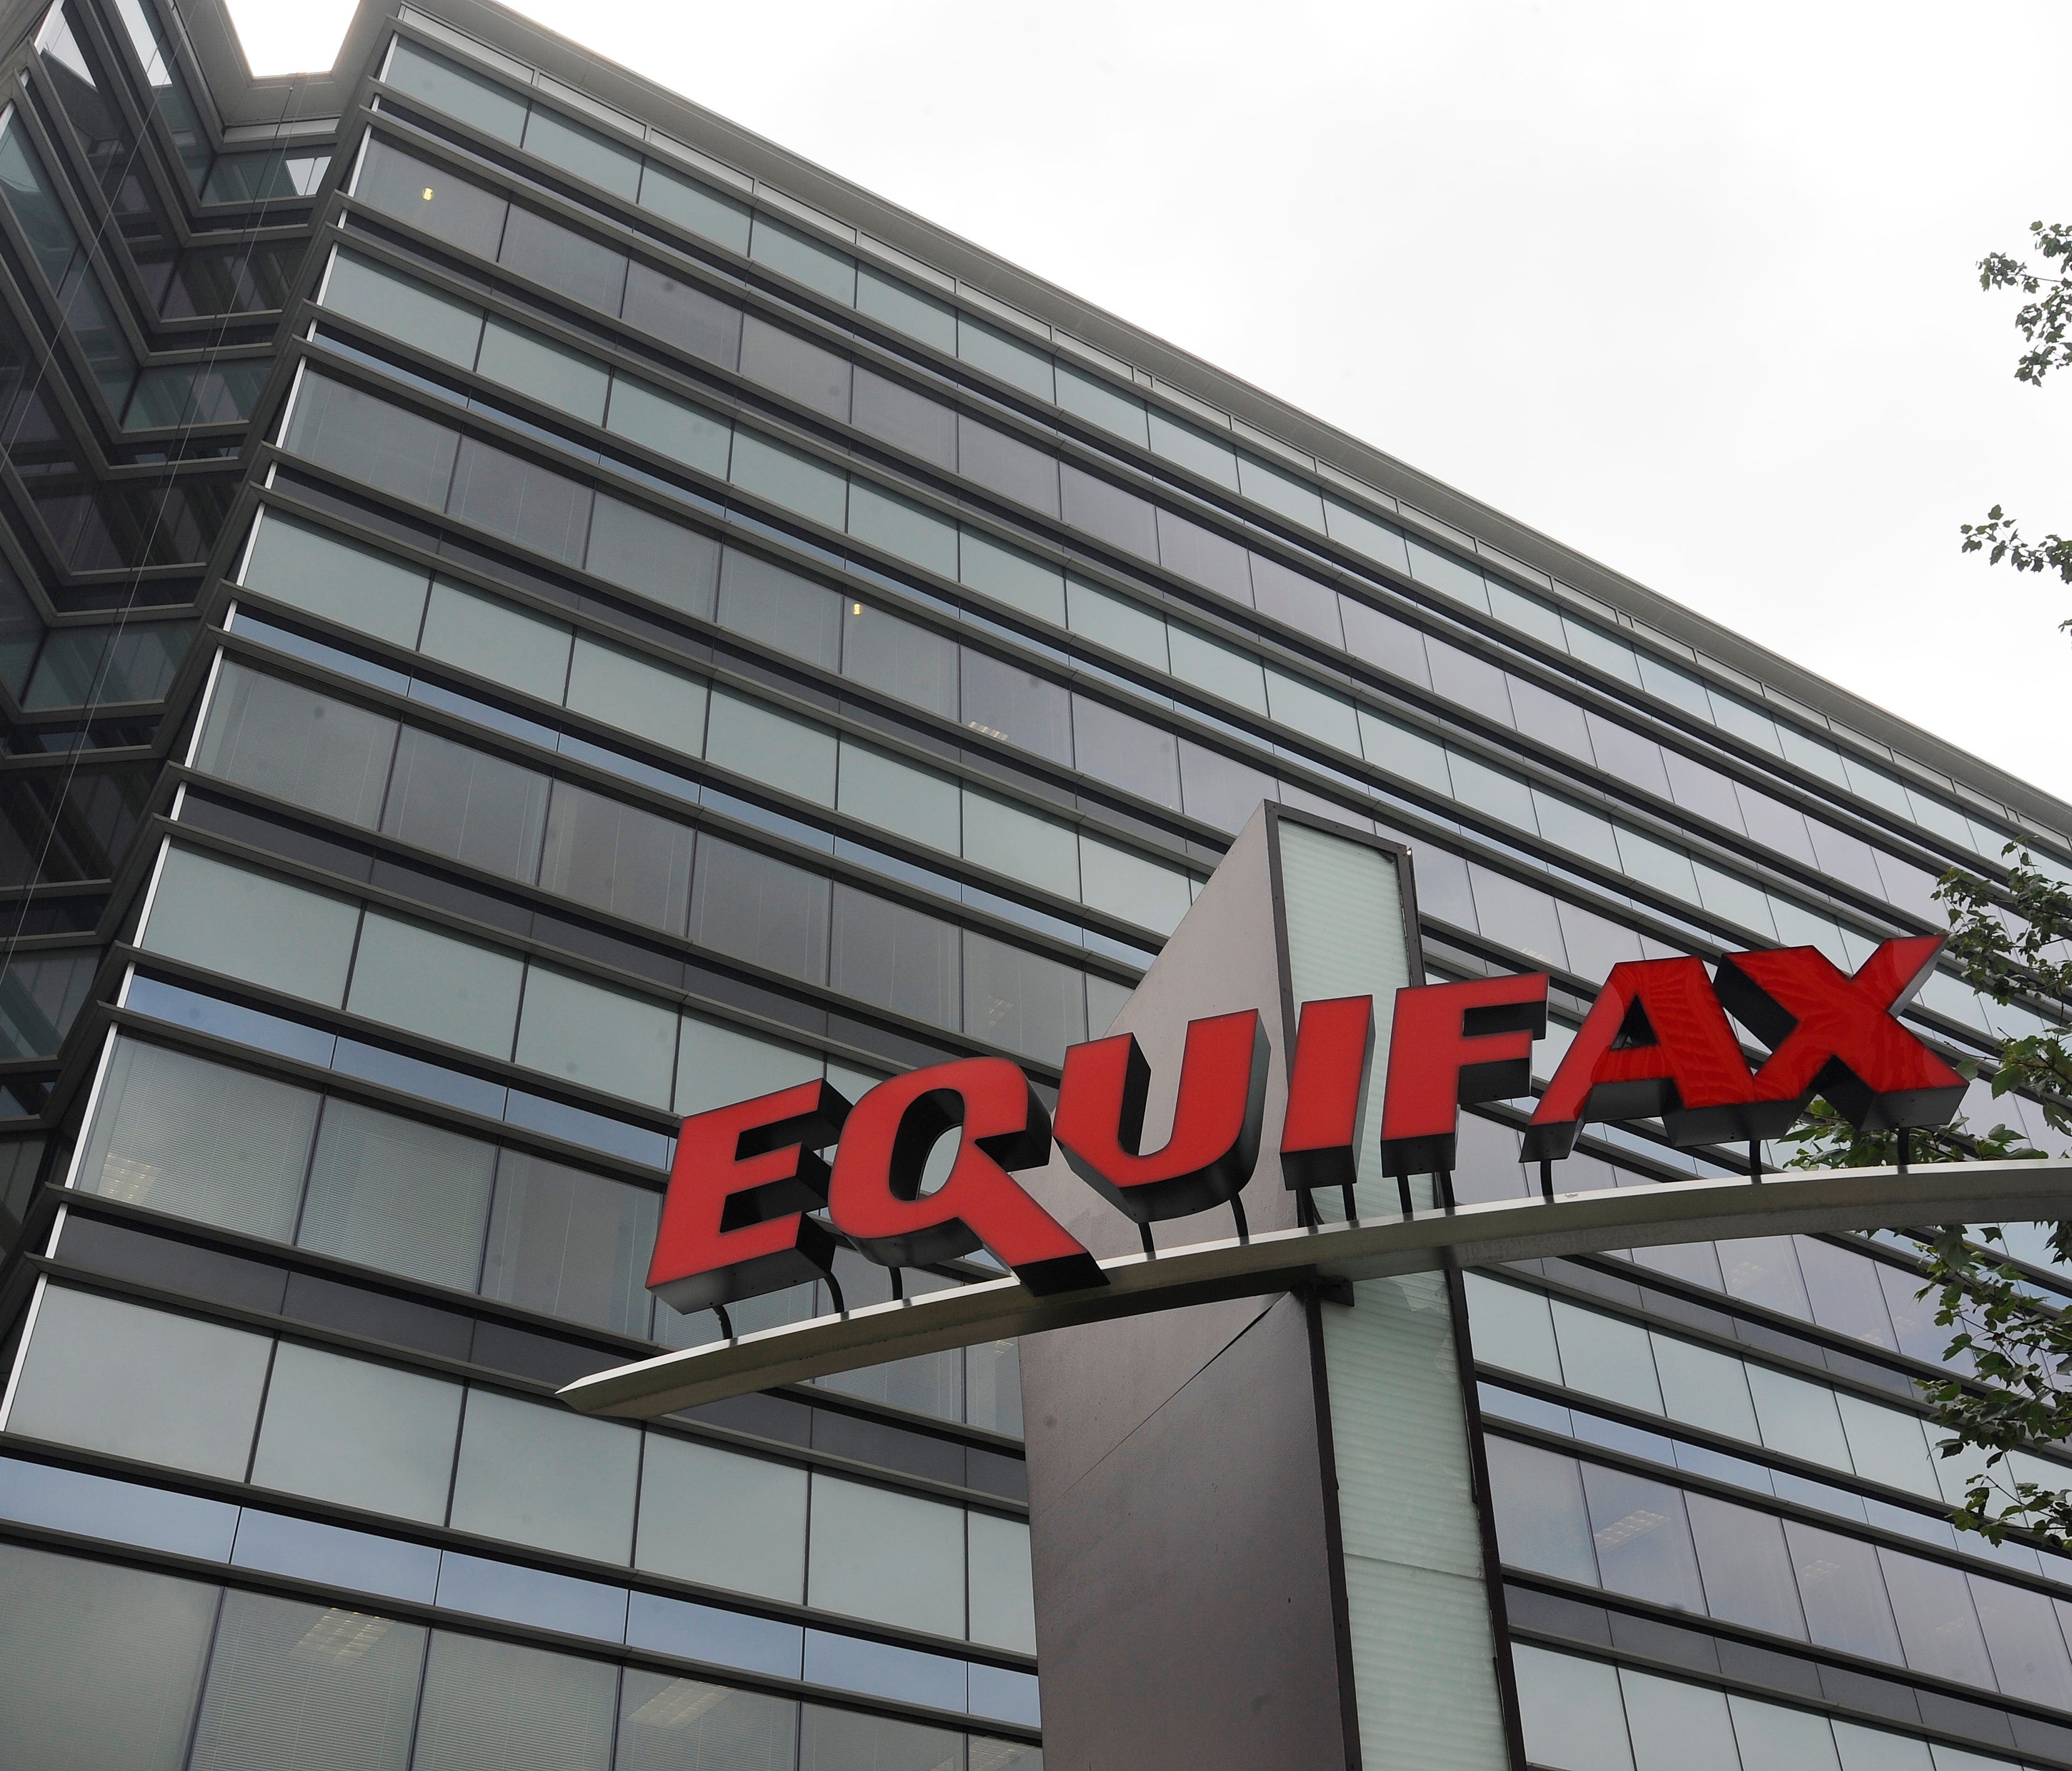 File photo taken in 2012 shows the Atlanta offices of credit-reporting giant Equifax.